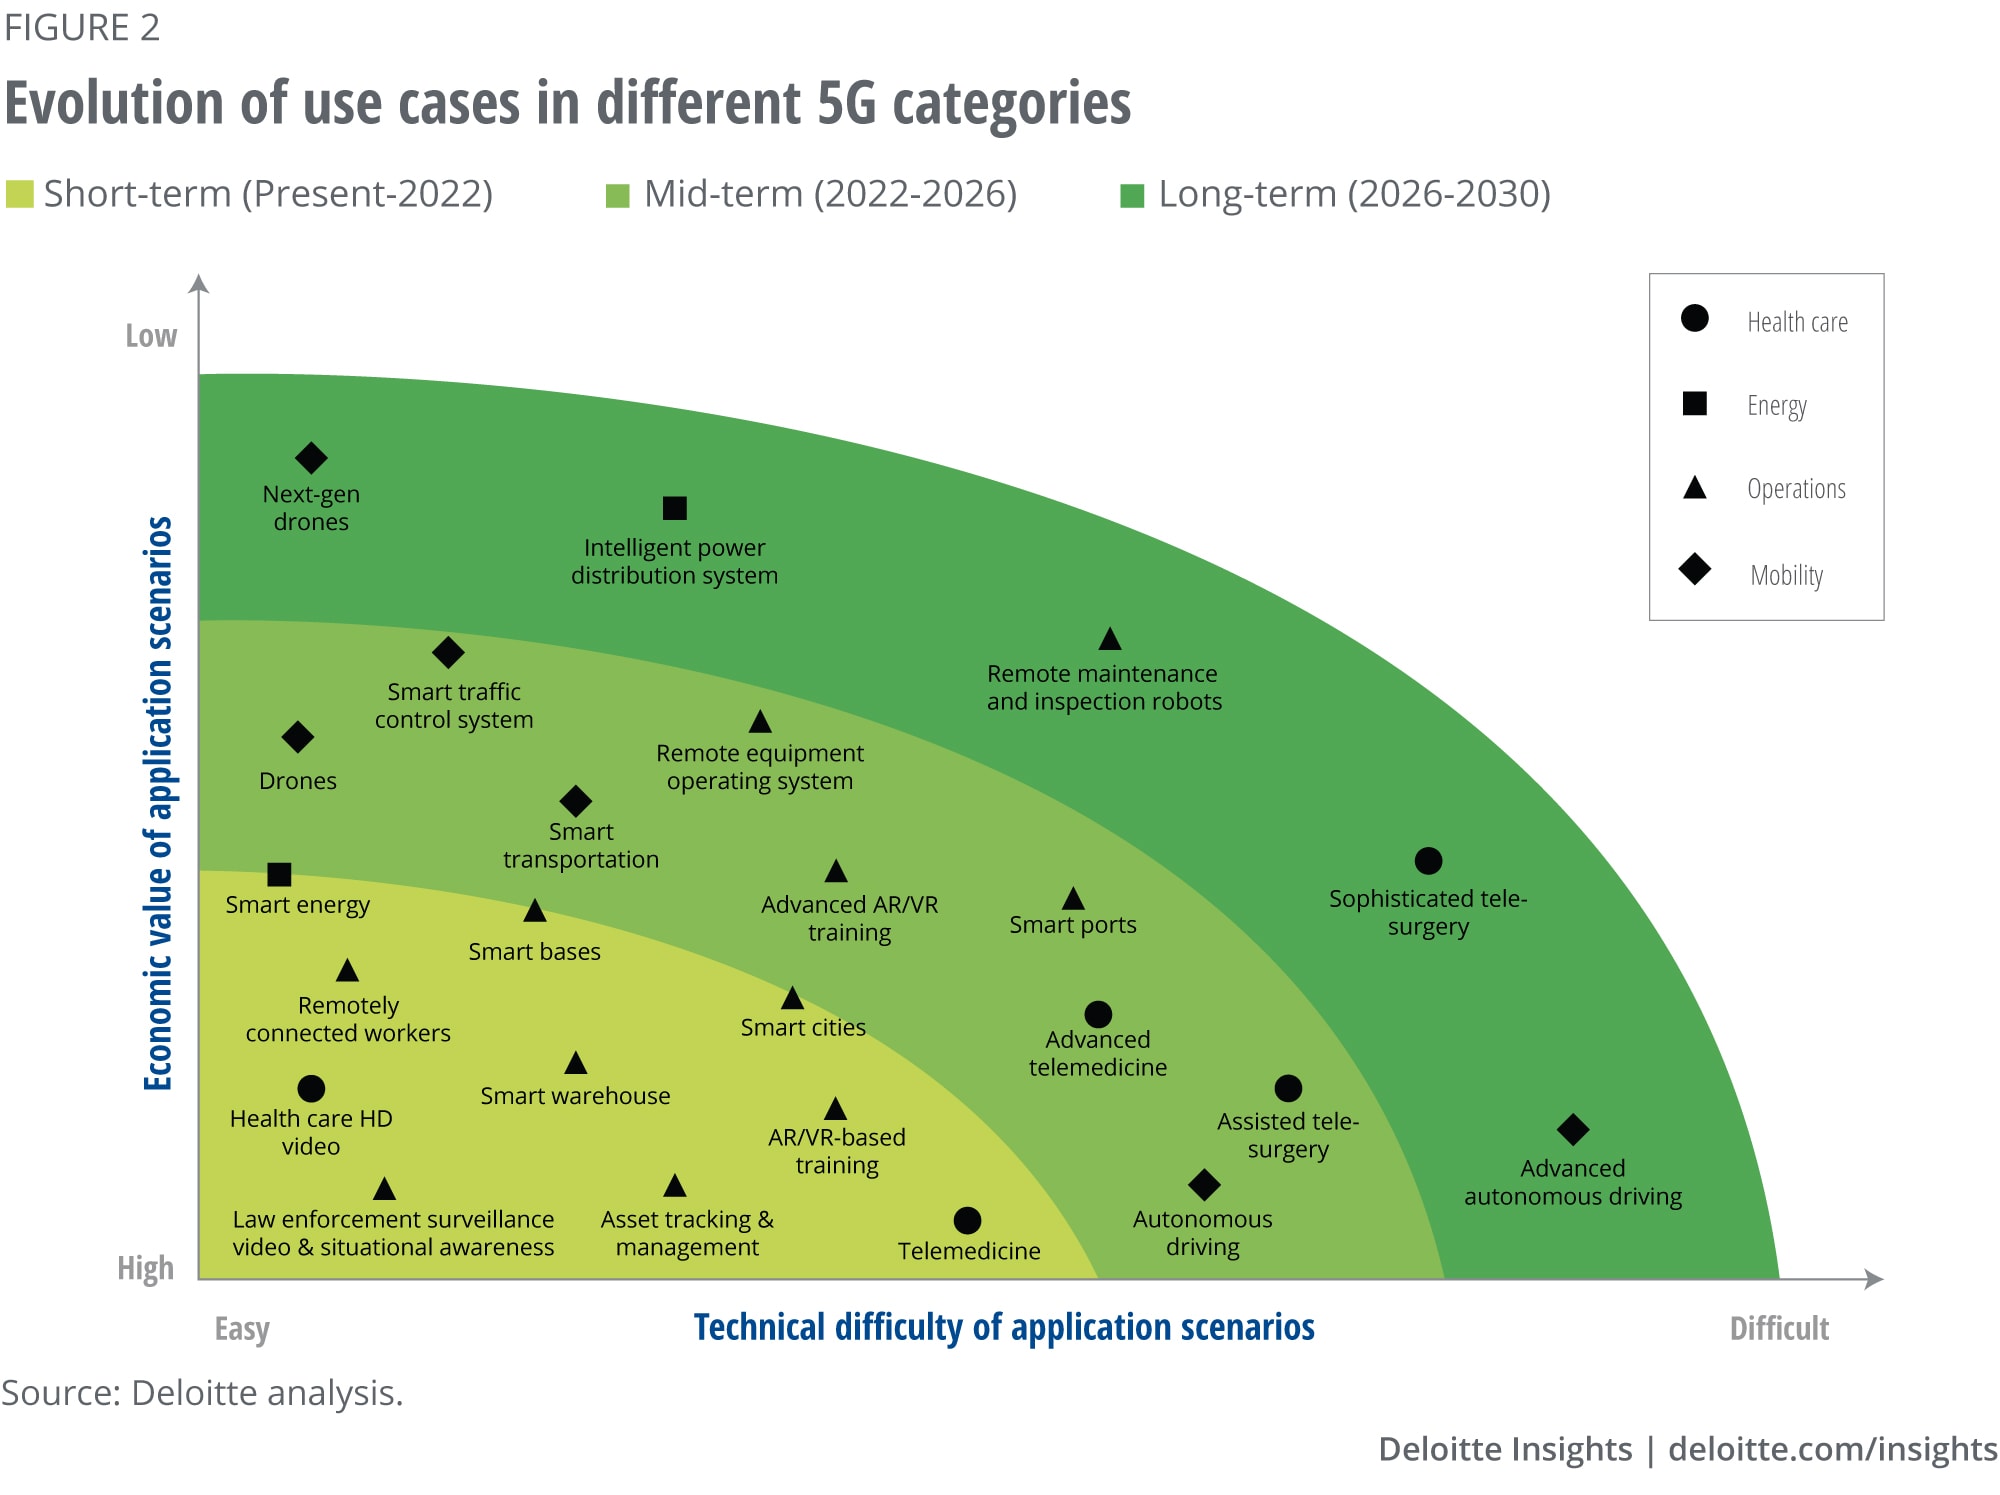 Evolution of use cases in different 5G categories